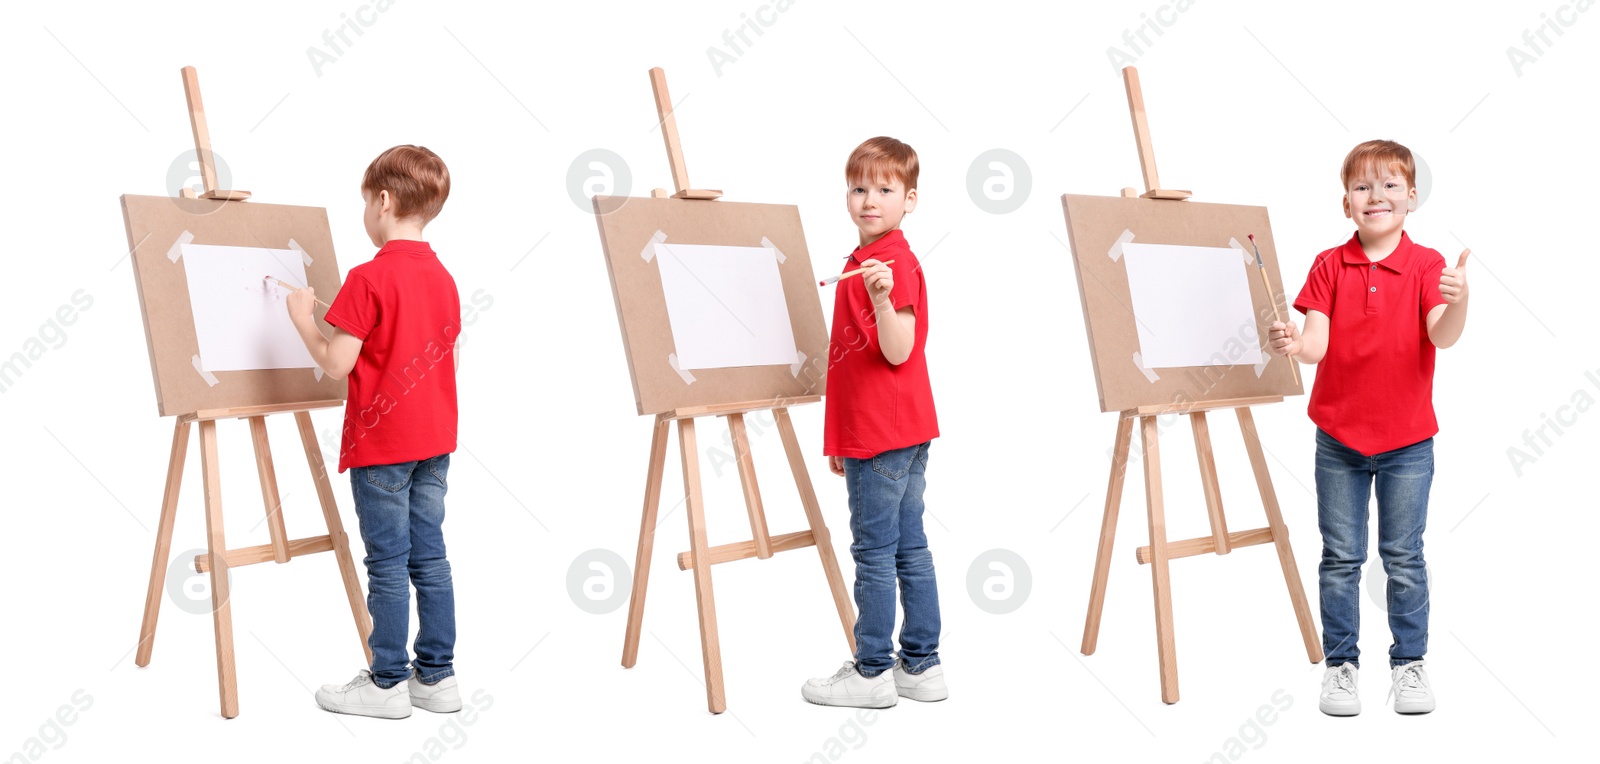 Image of Collage with photos of boy near easel on white background